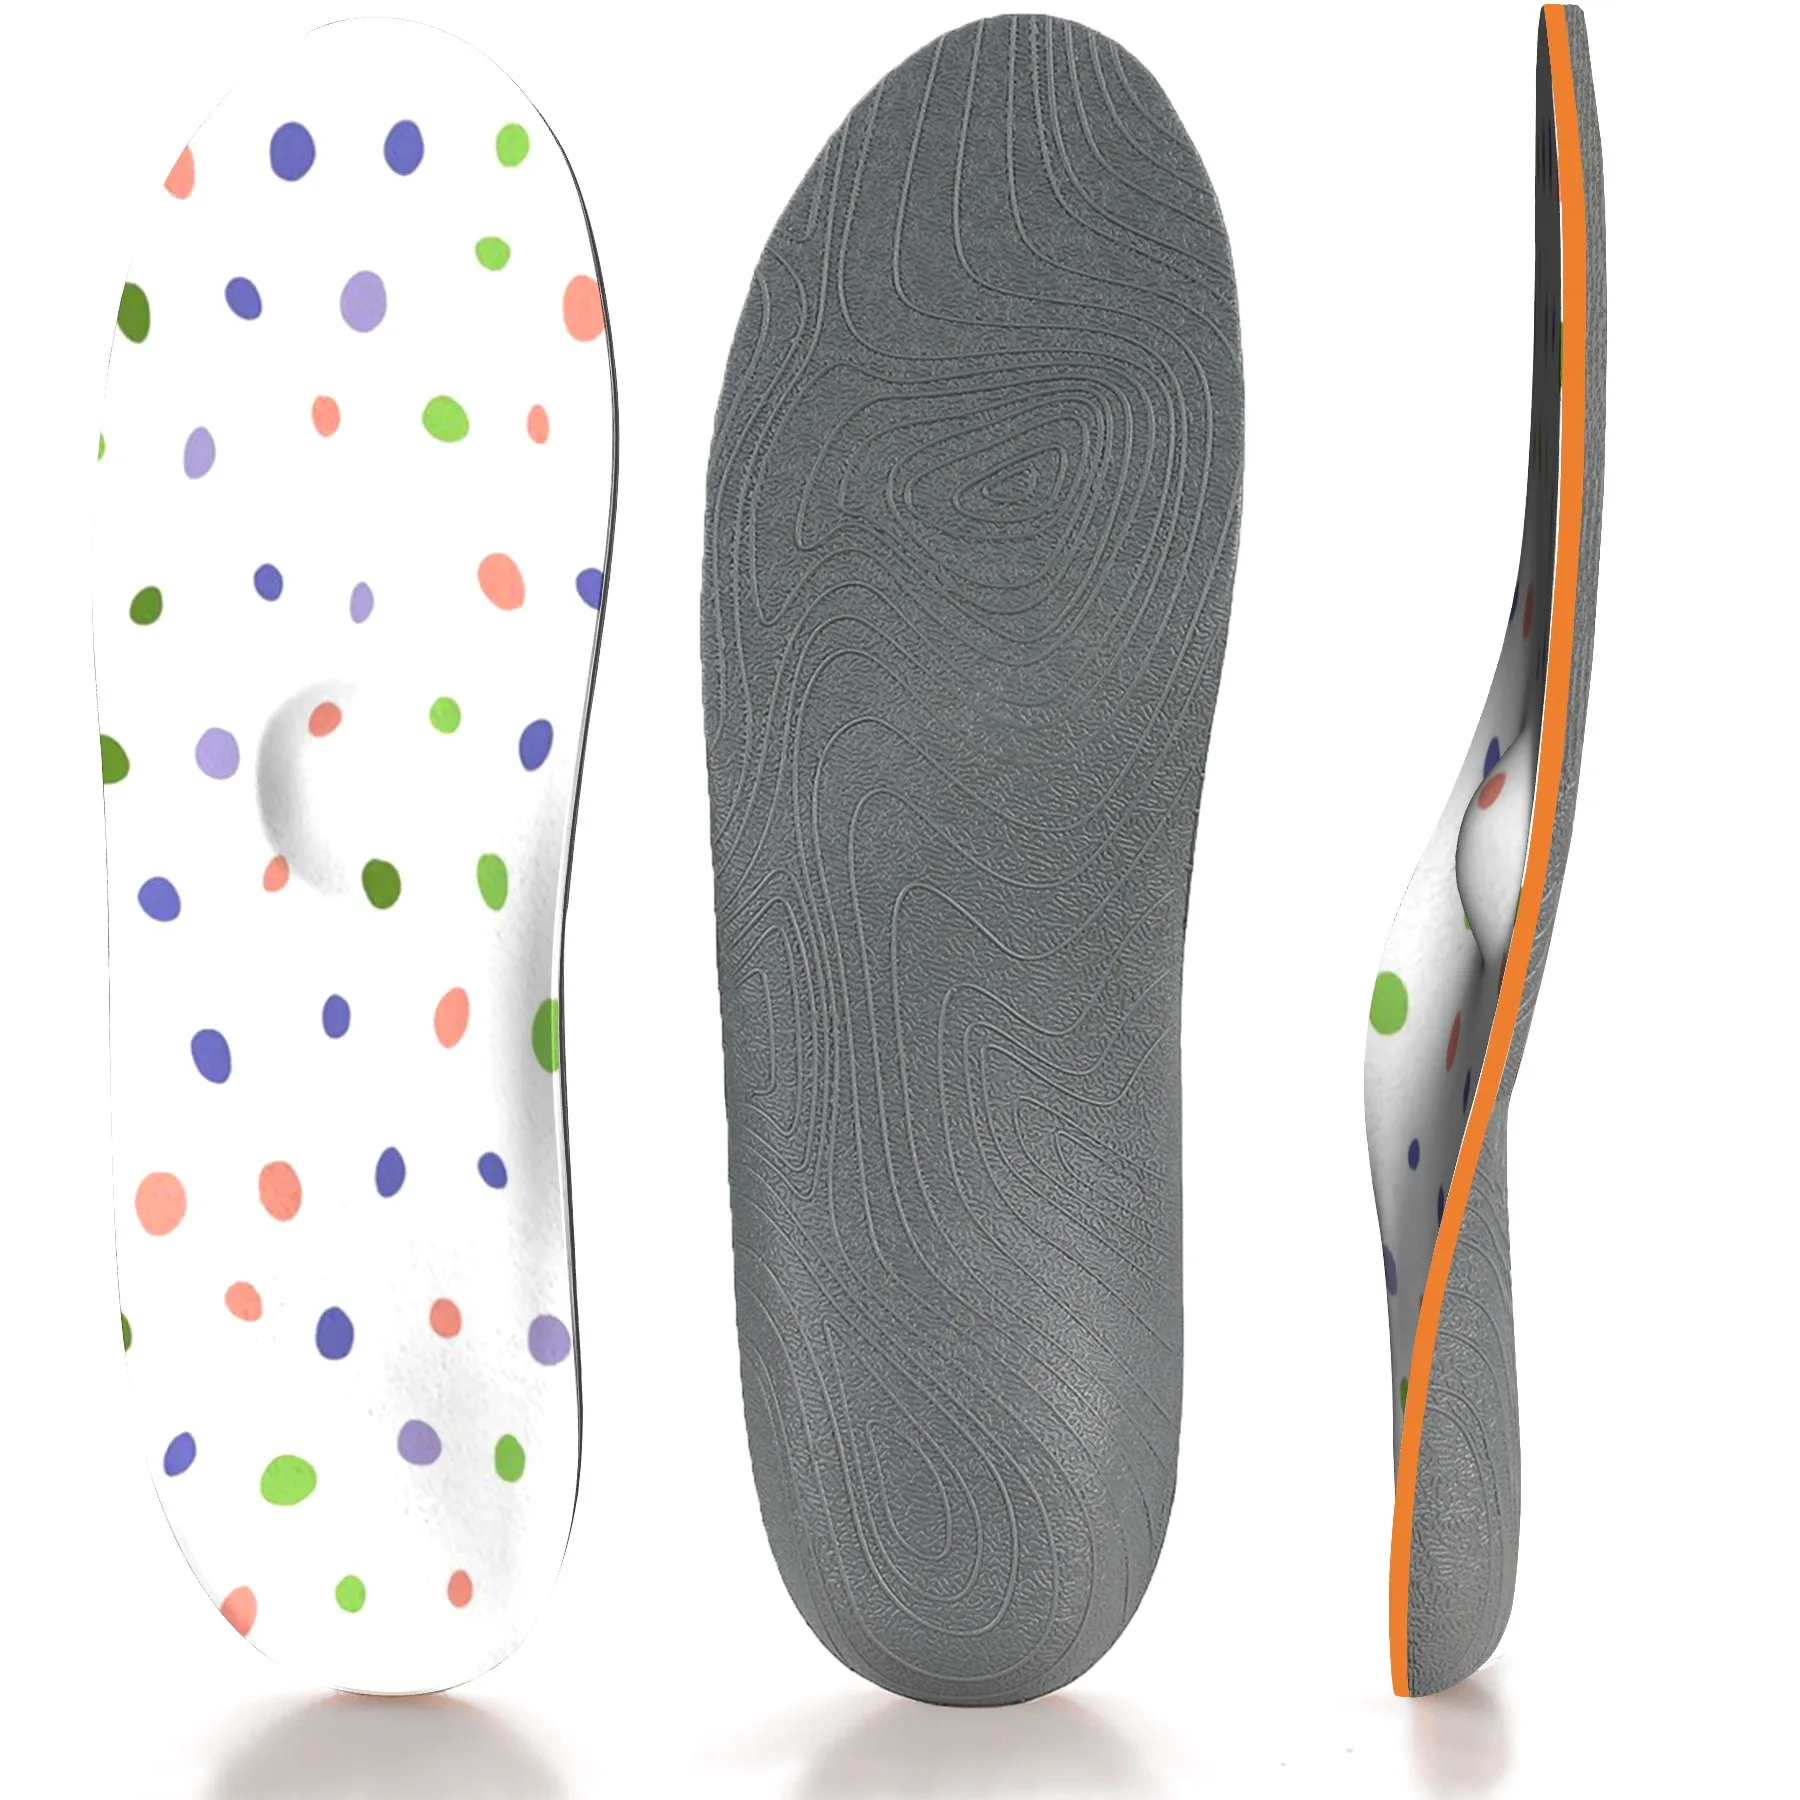 Full-Length Arch Anti-wear Foot Insole Absorb Sweat Playing Football Beauty Shoes